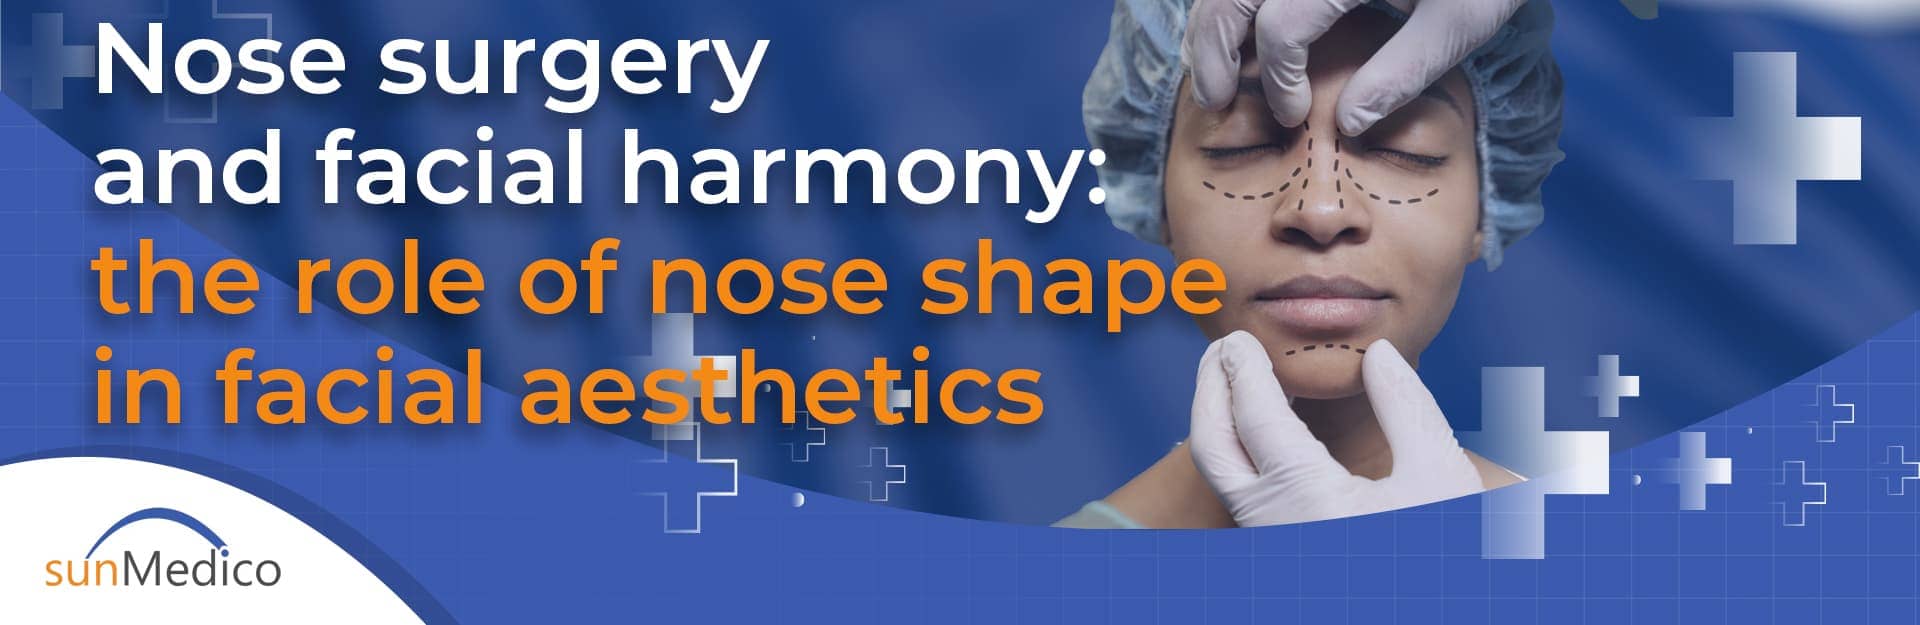 Nose surgery and facial harmony: the role of nose shape in facial aesthetics